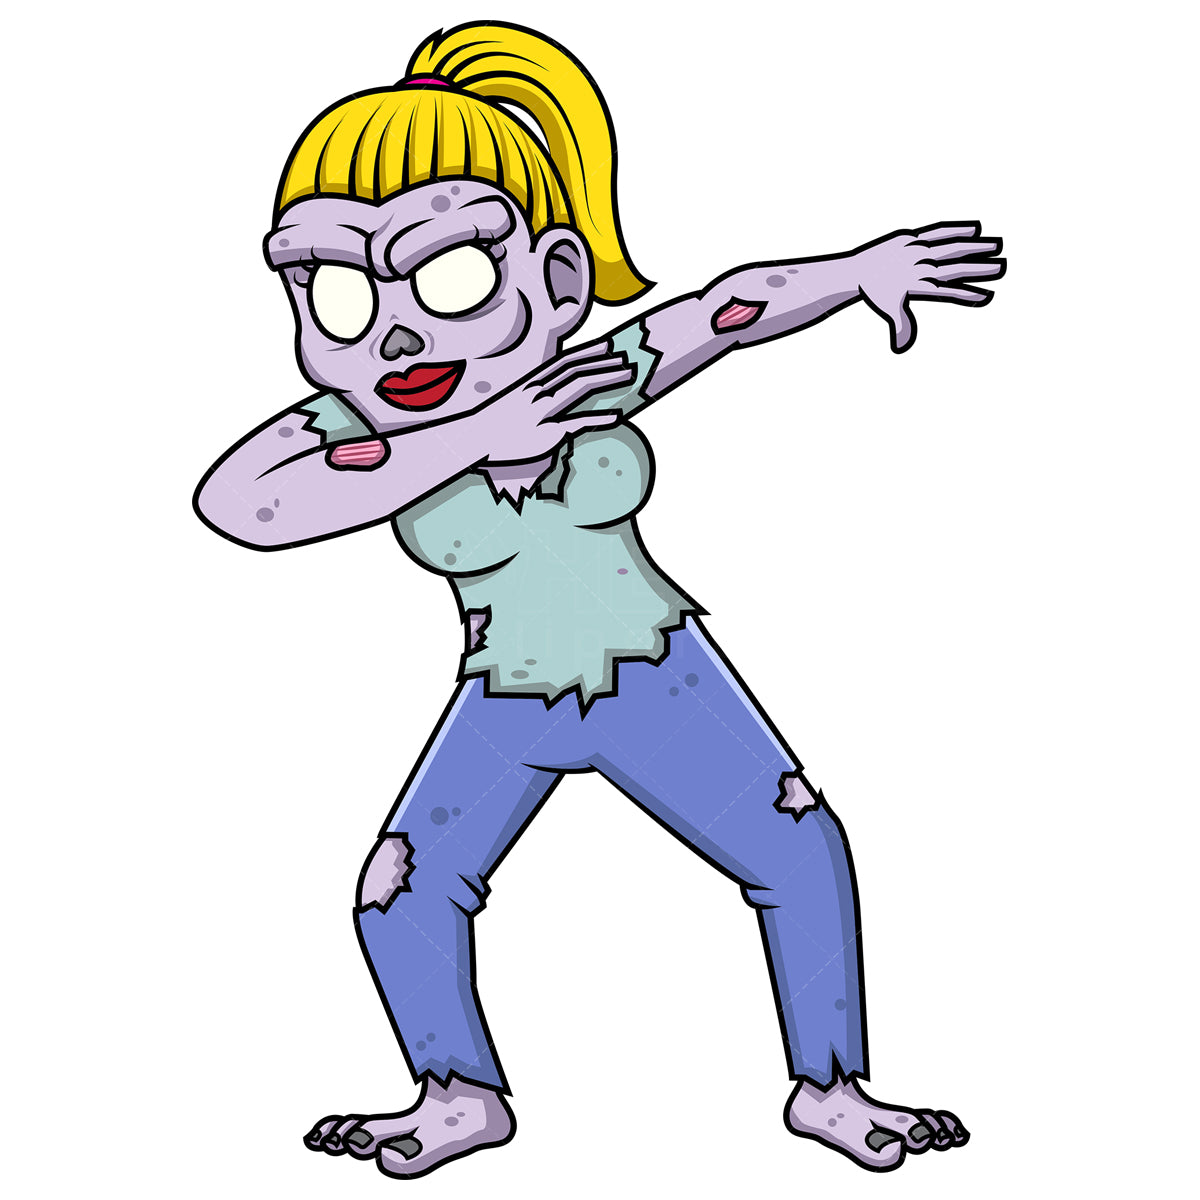 Royalty-free stock vector illustration of a dabbing female zombie.